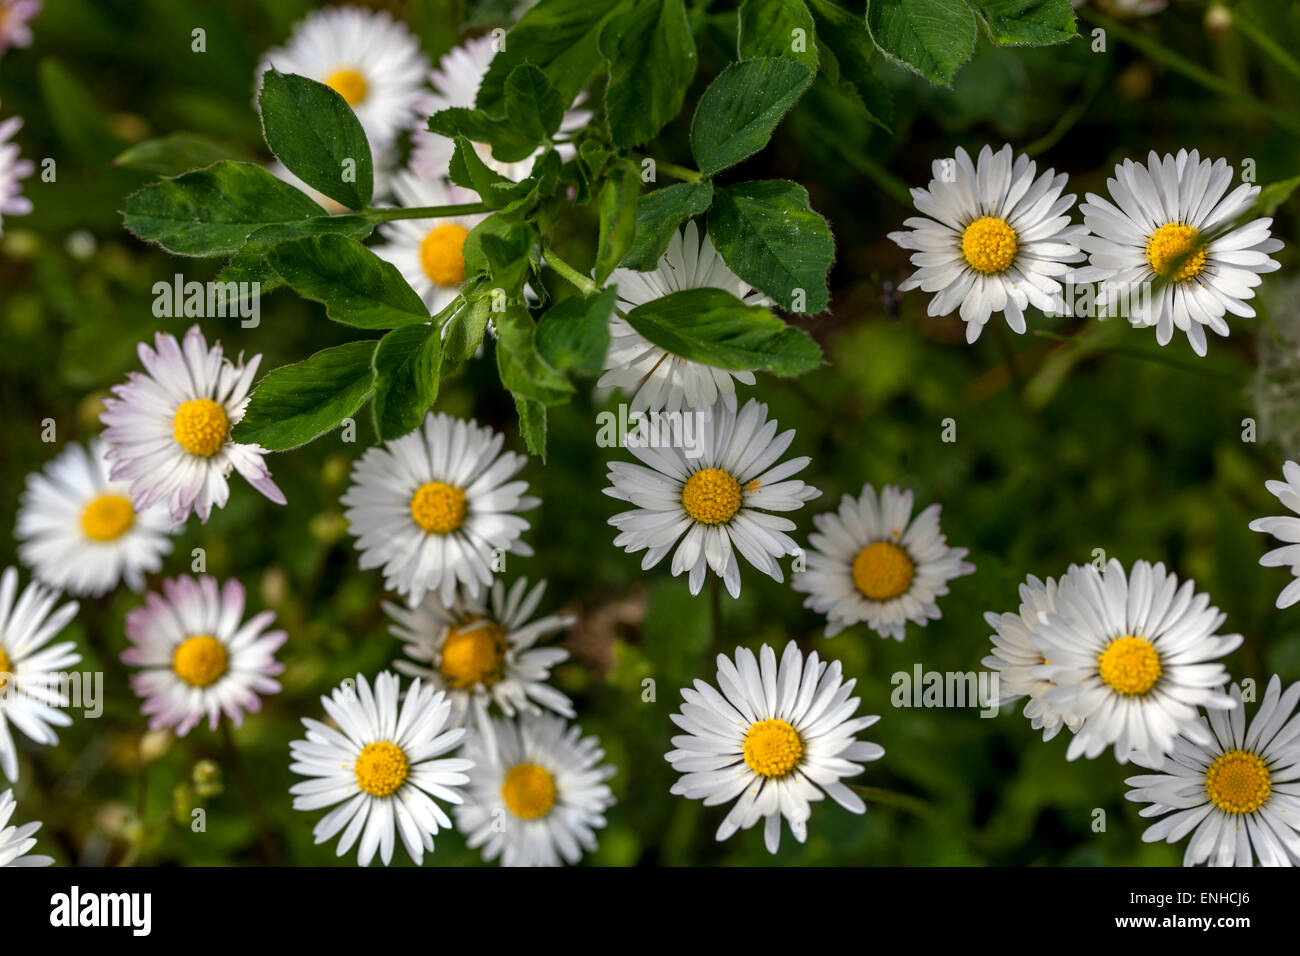 English Daisies, Bellis perennis growing in grassy lawn garden, daisies in lawn Stock Photo